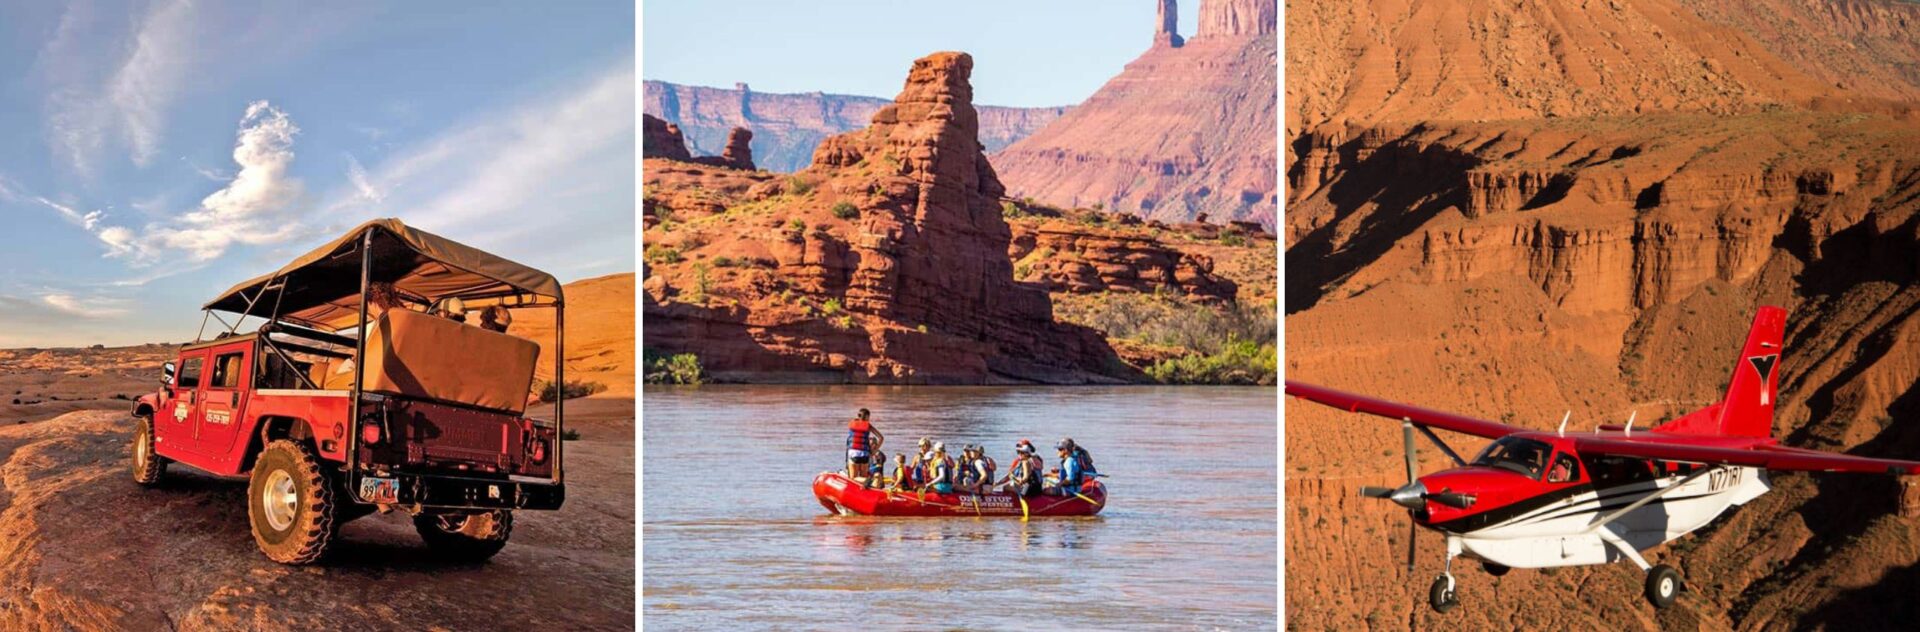 adventures in moab by jeep, whitewater raft, and aircraft